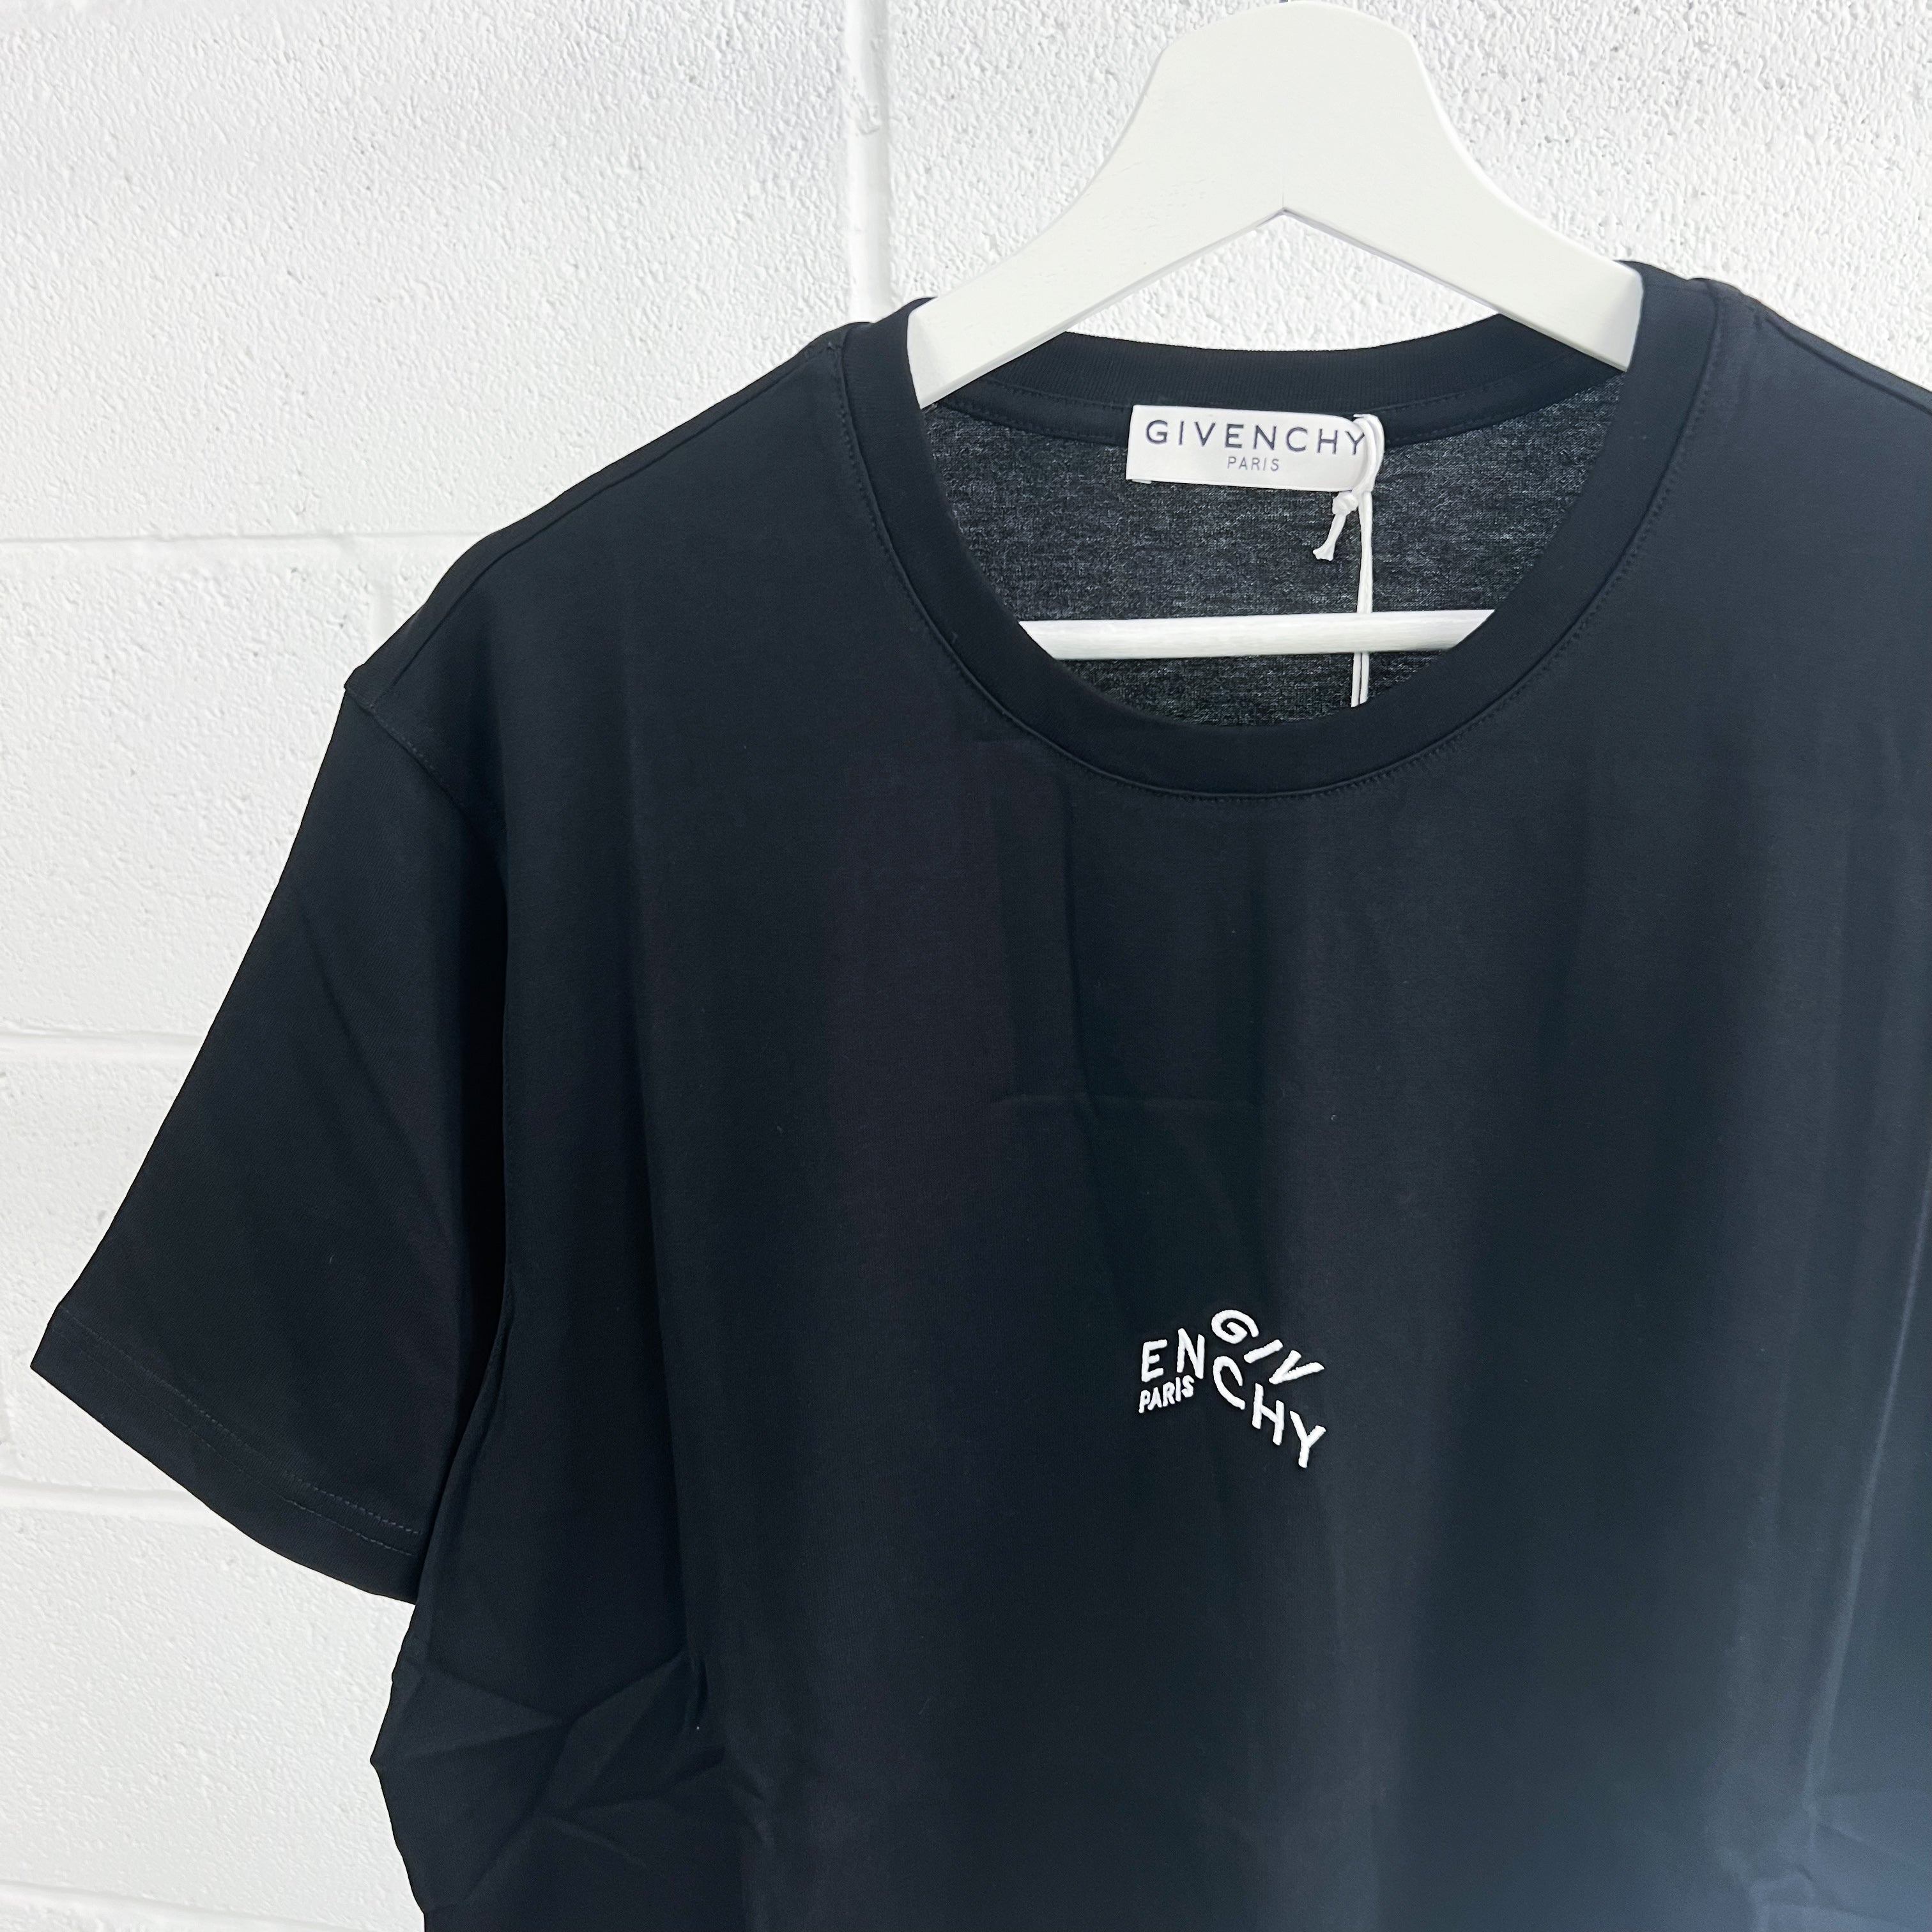 Givenchy Mini Refracted Embroidery Tee - Black